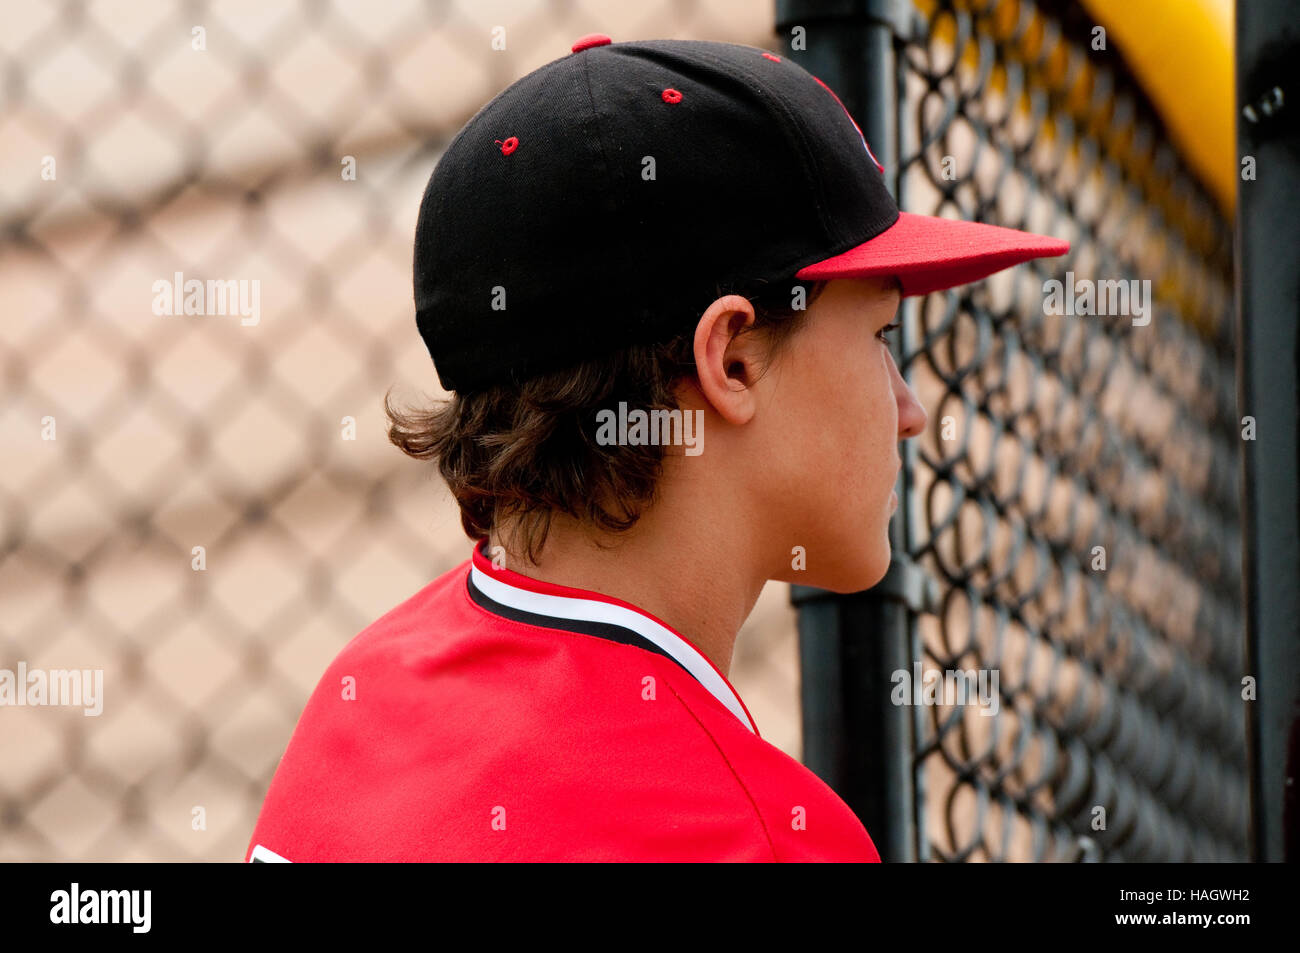 Profile of American baseball player close up in the dugout. Stock Photo